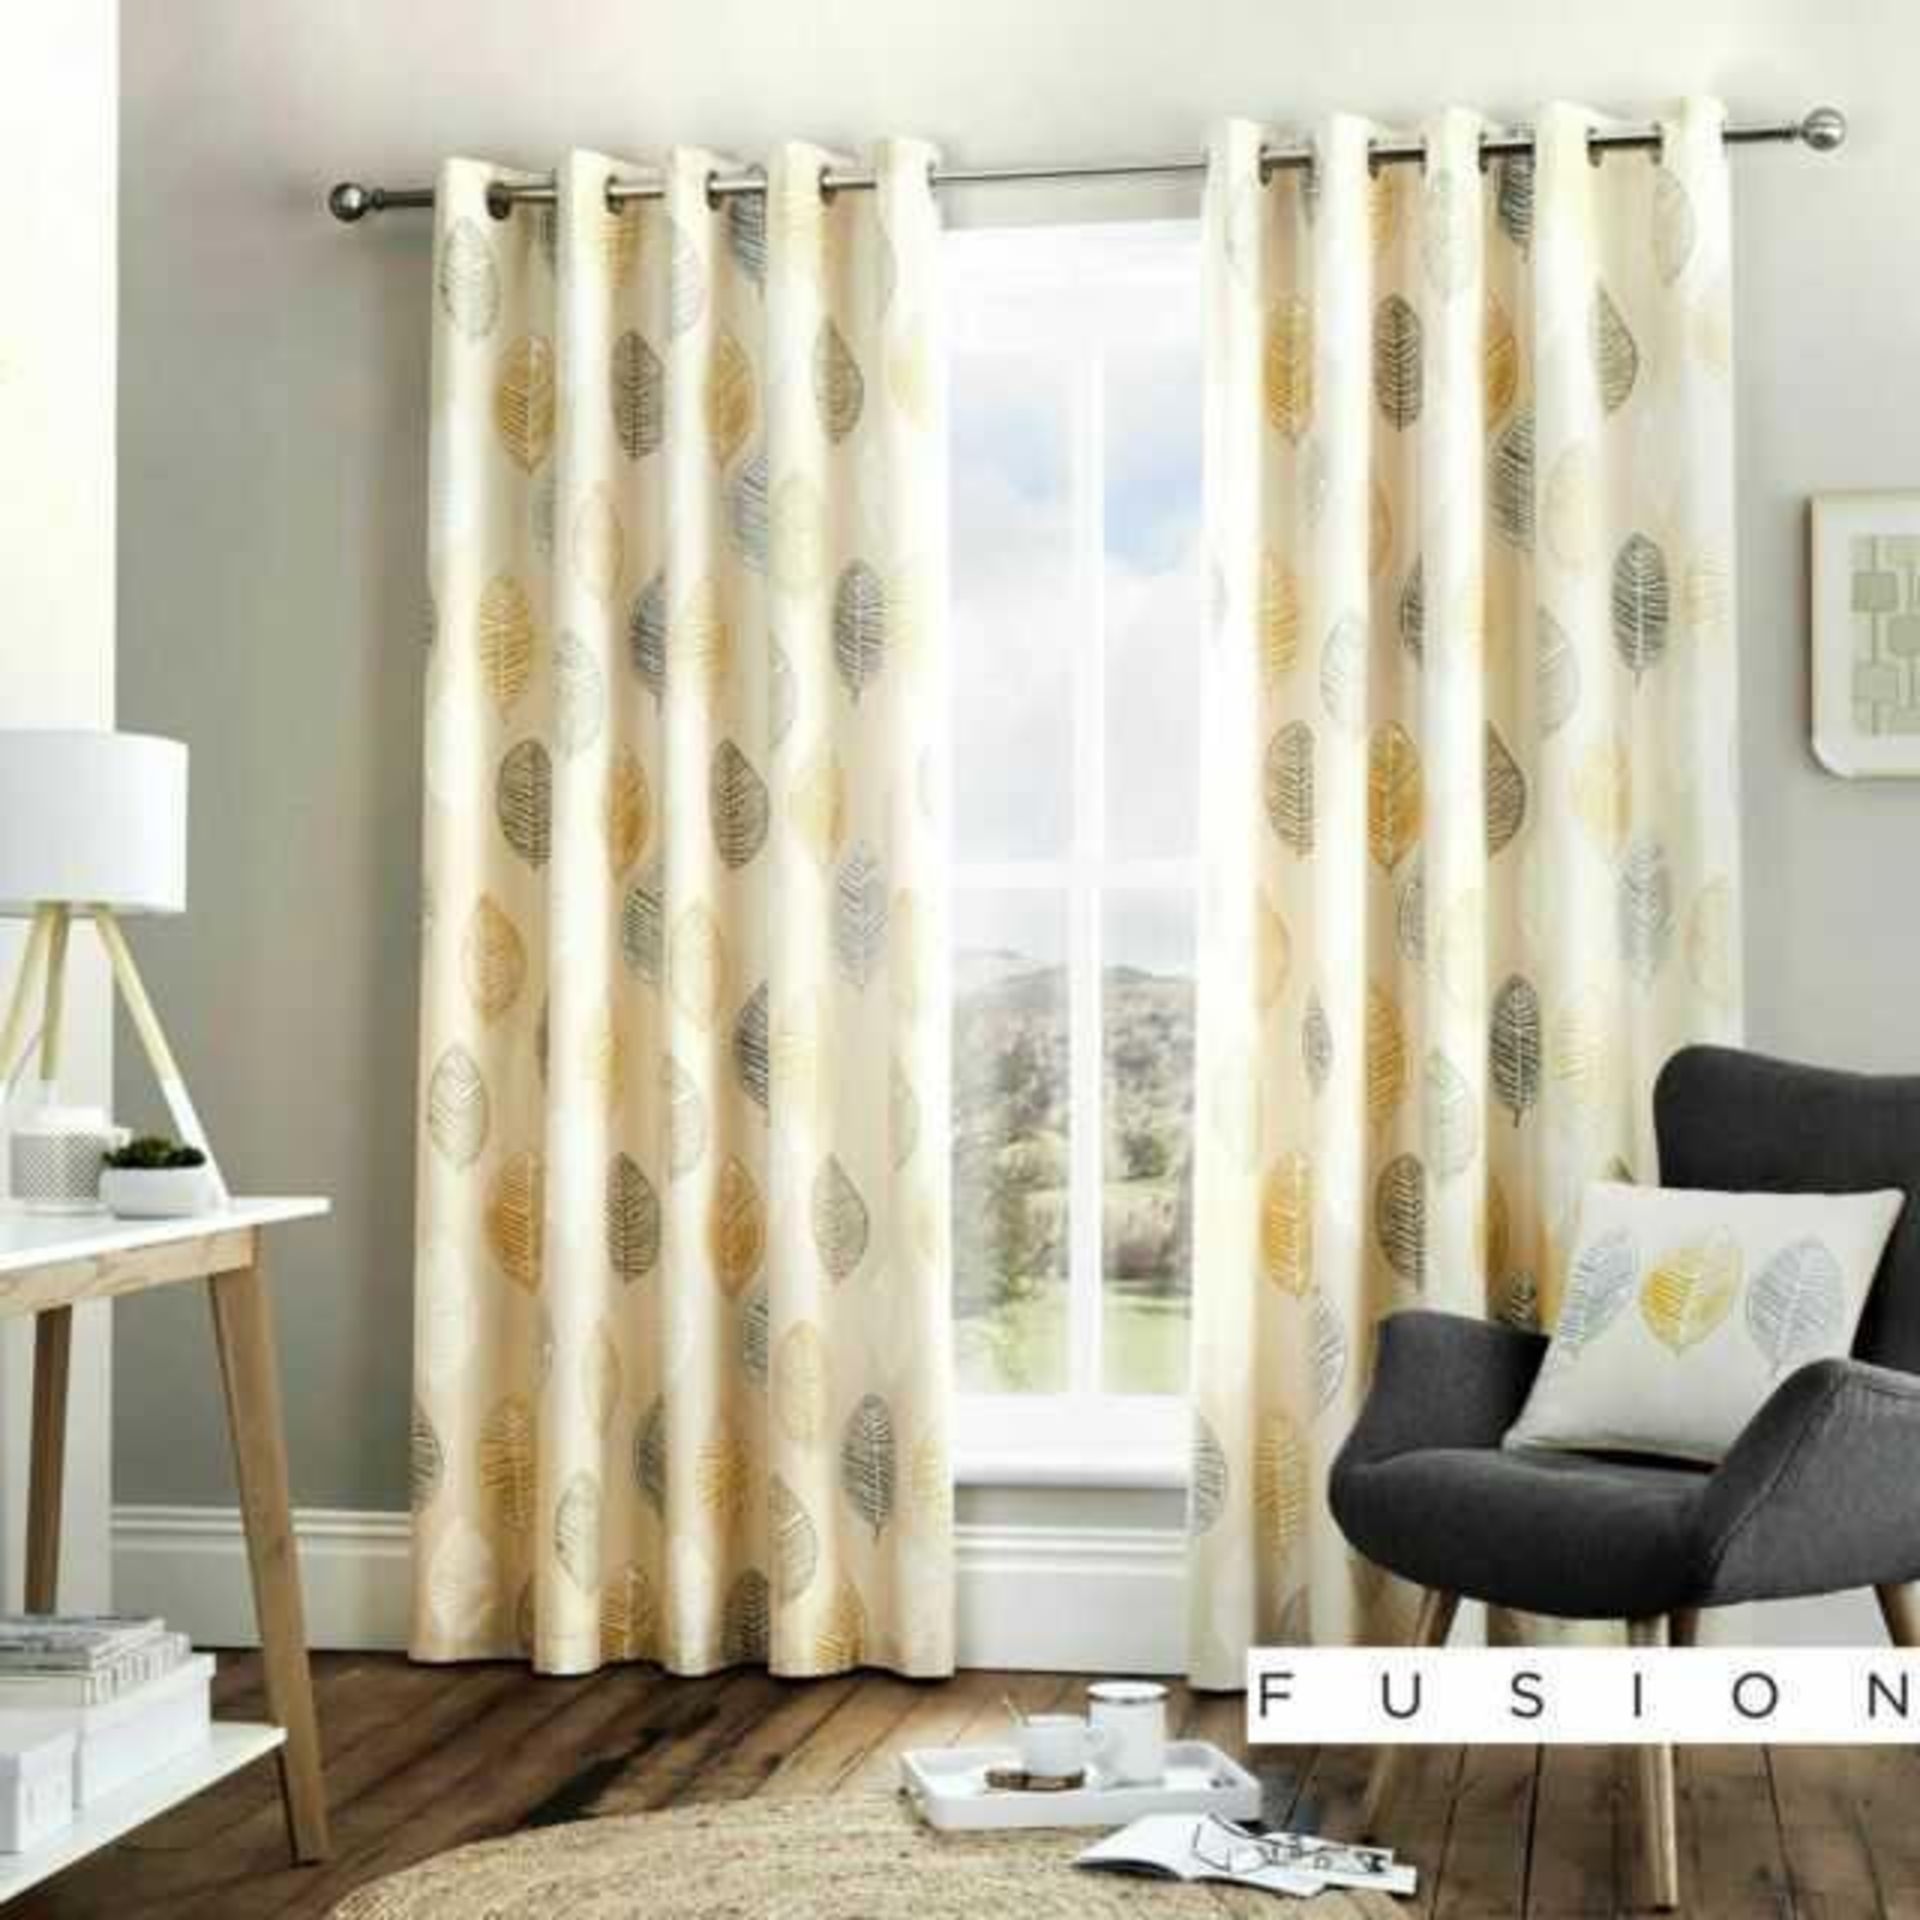 Combined RRP £130 Lot To Contain Two Unboxed Gold Fabric Eyelet Curtains & Fusion Fully Lined Eyelet - Image 2 of 2